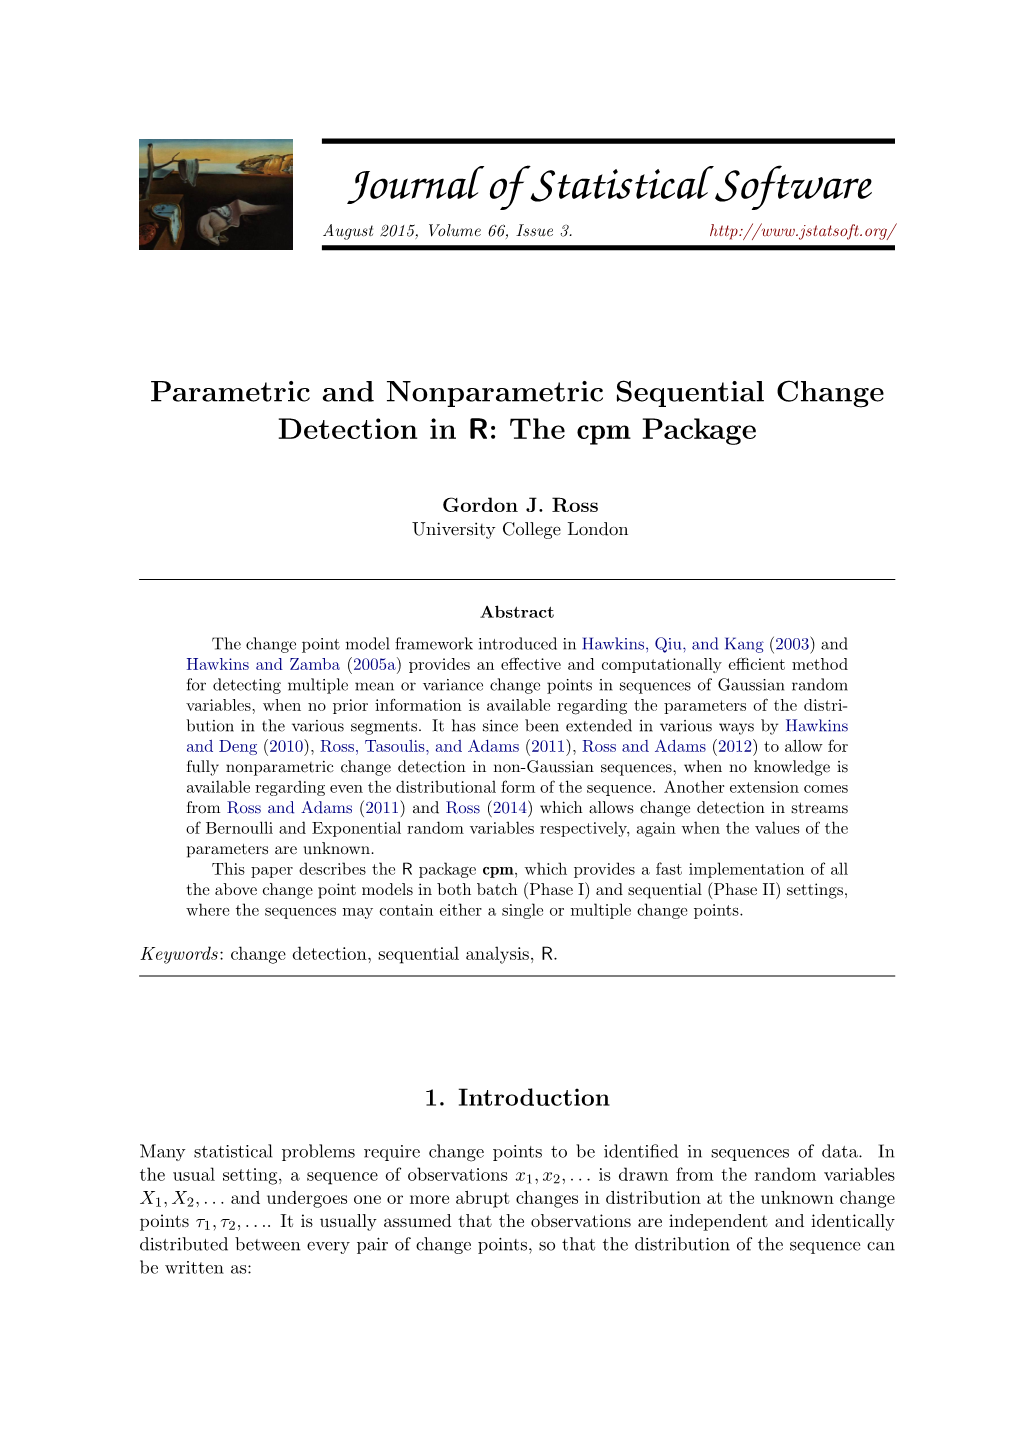 Parametric and Nonparametric Sequential Change Detection in R: the Cpm Package